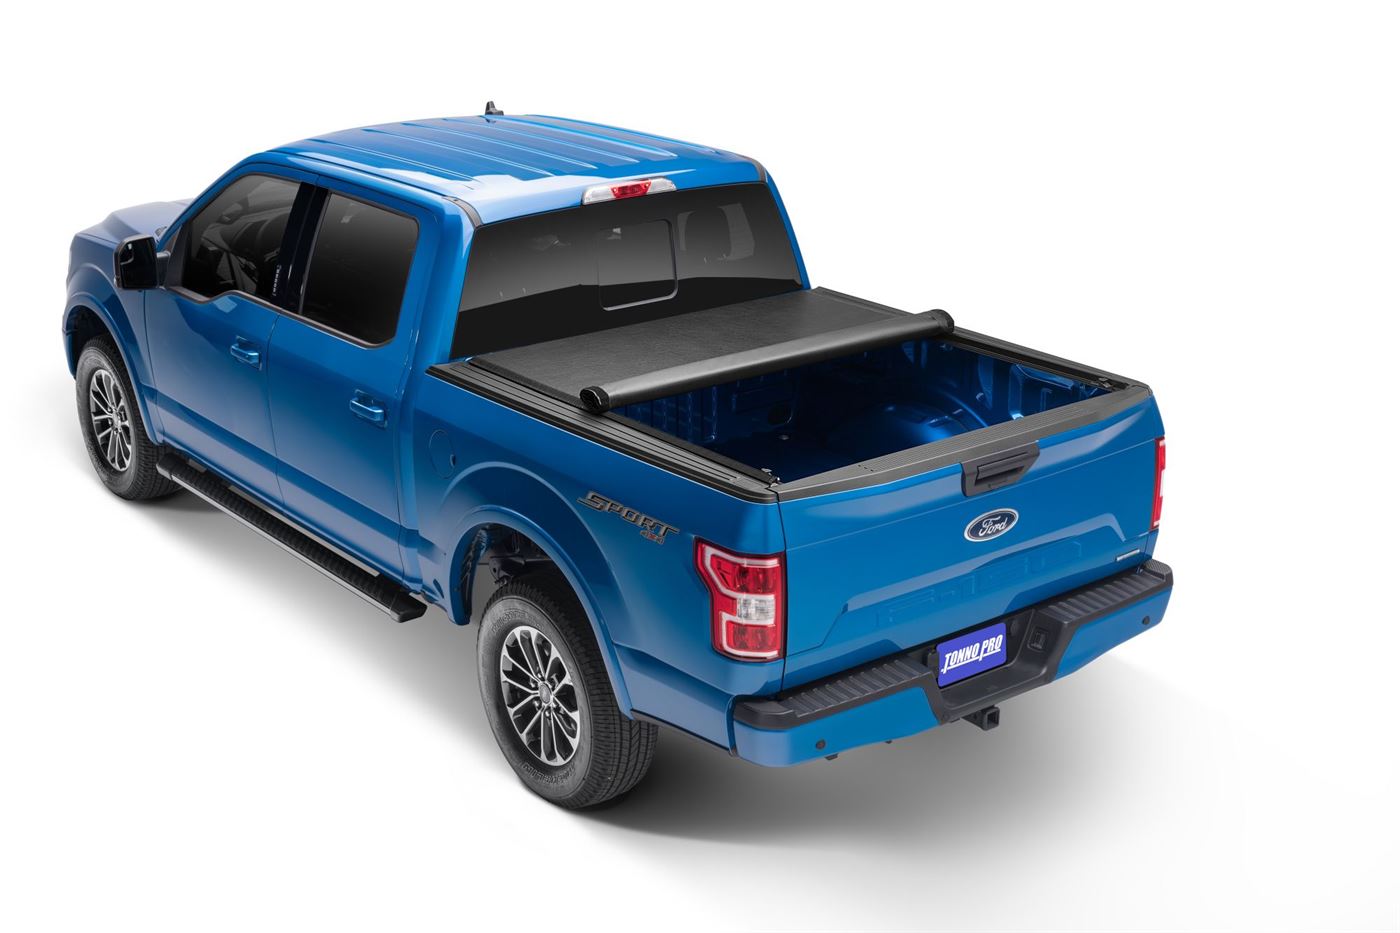 Roll Up Tonneau Covers